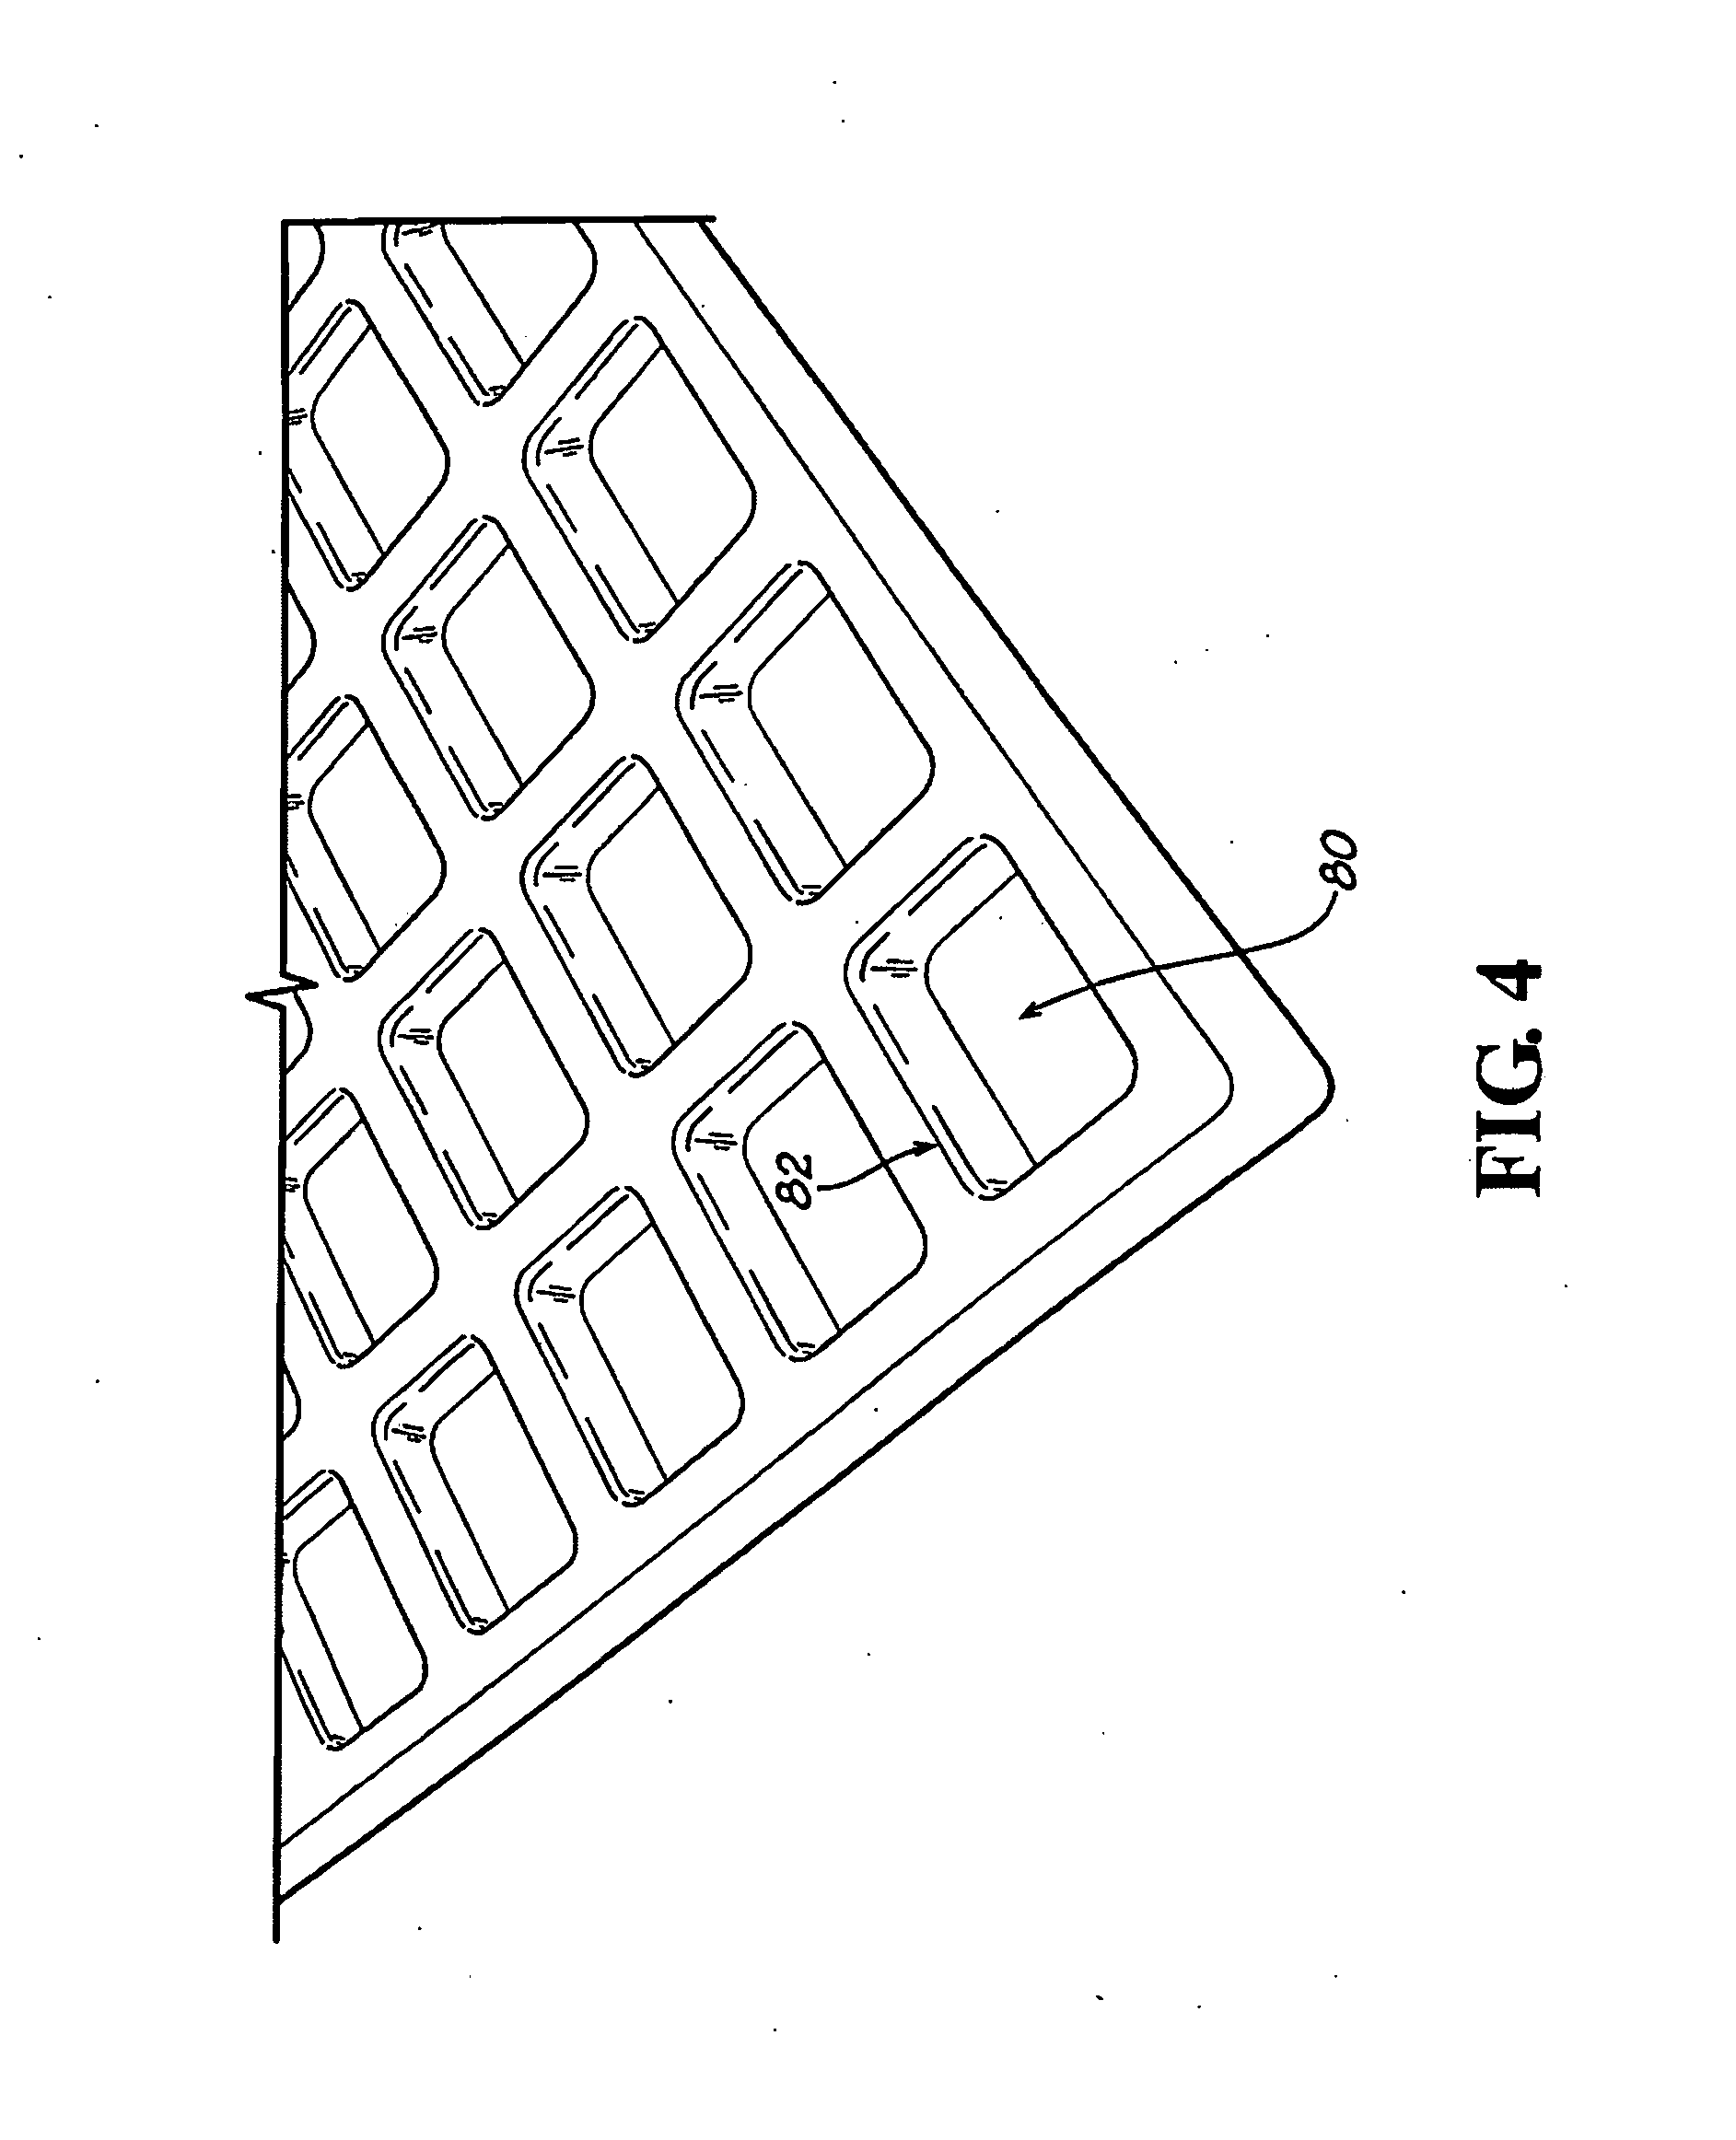 Placental tissue grafts modified with a cross-linking agent and methods of making and using the same